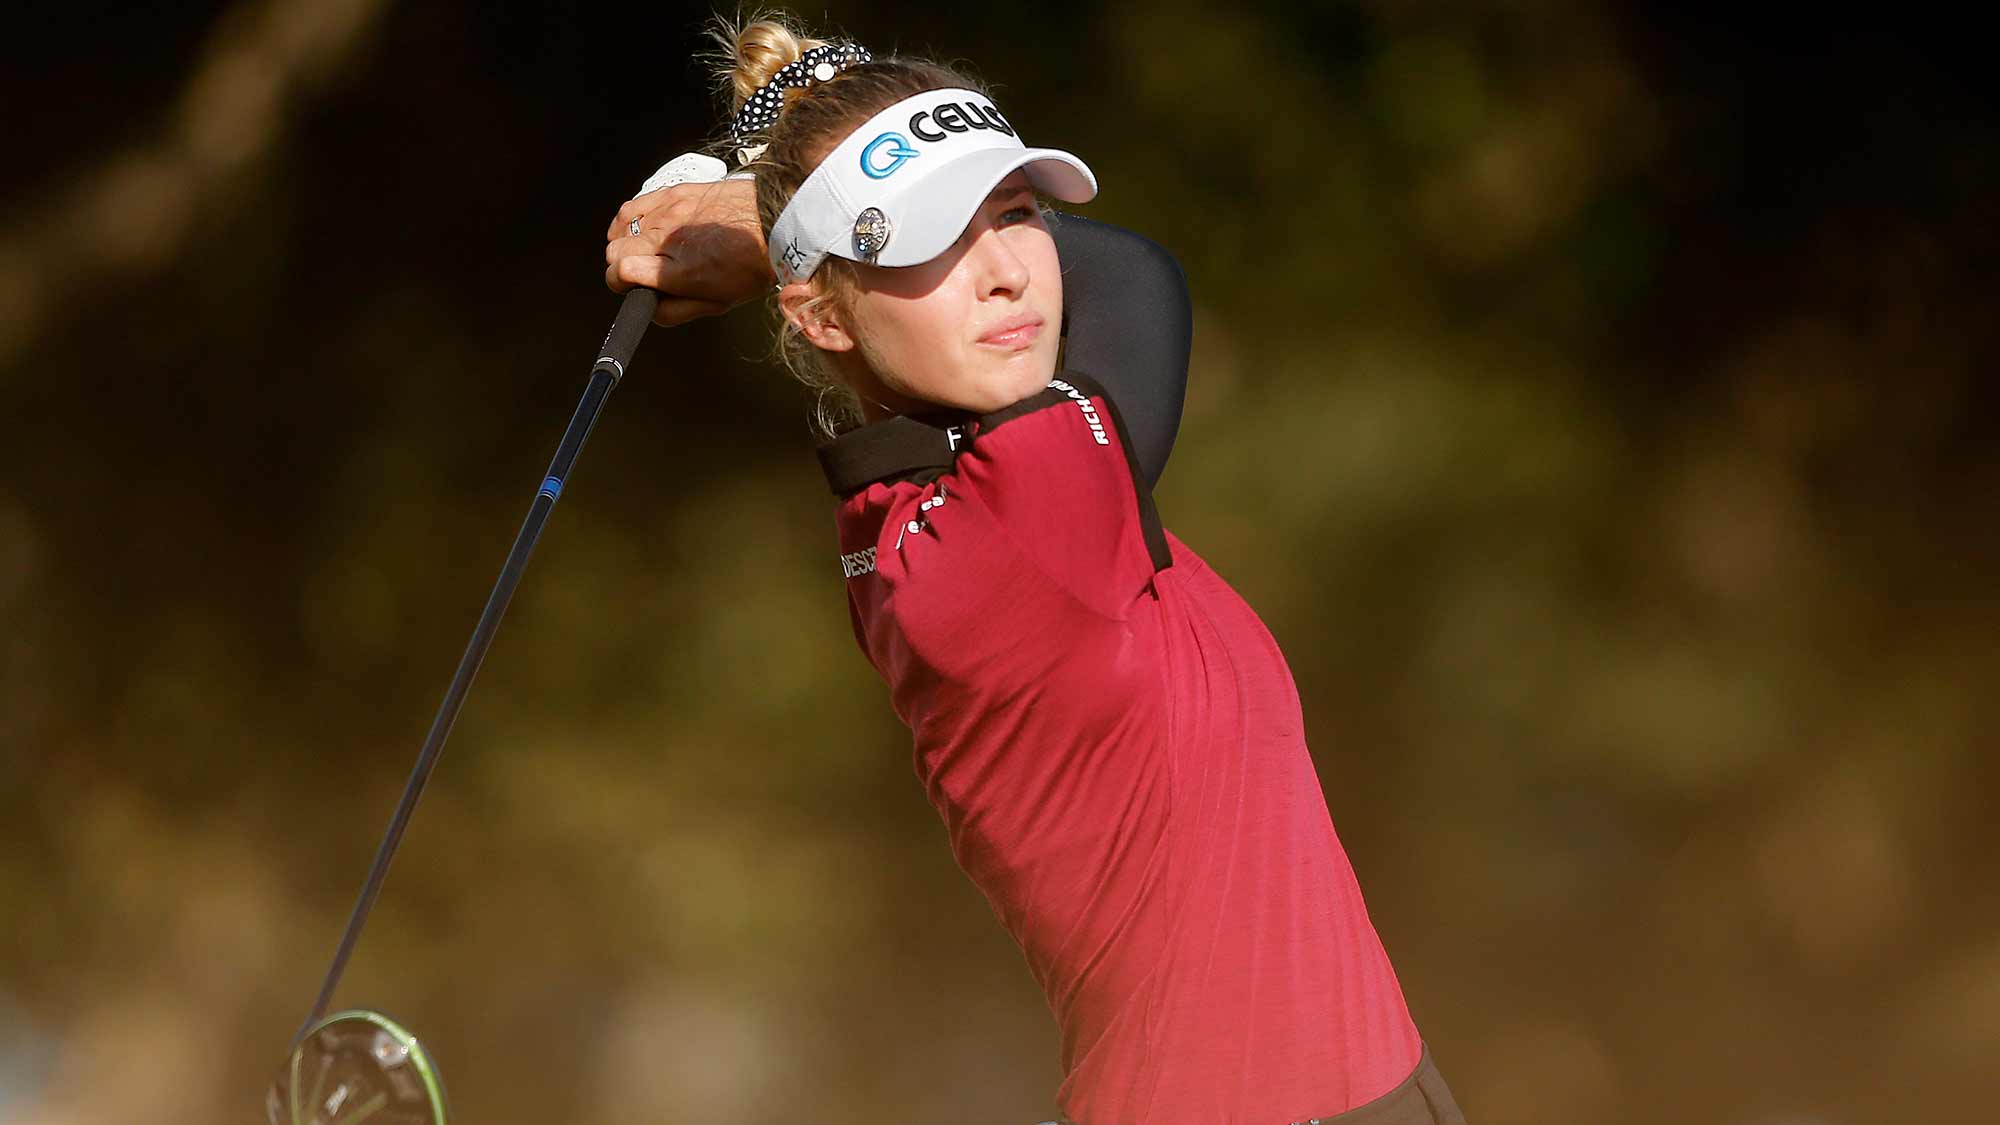 Nelly Korda of the United States plays her shot from the 18th tee during the final round of the CME Group Tour Championship at Tiburon Golf Club on November 24, 2019 in Naples, Florida